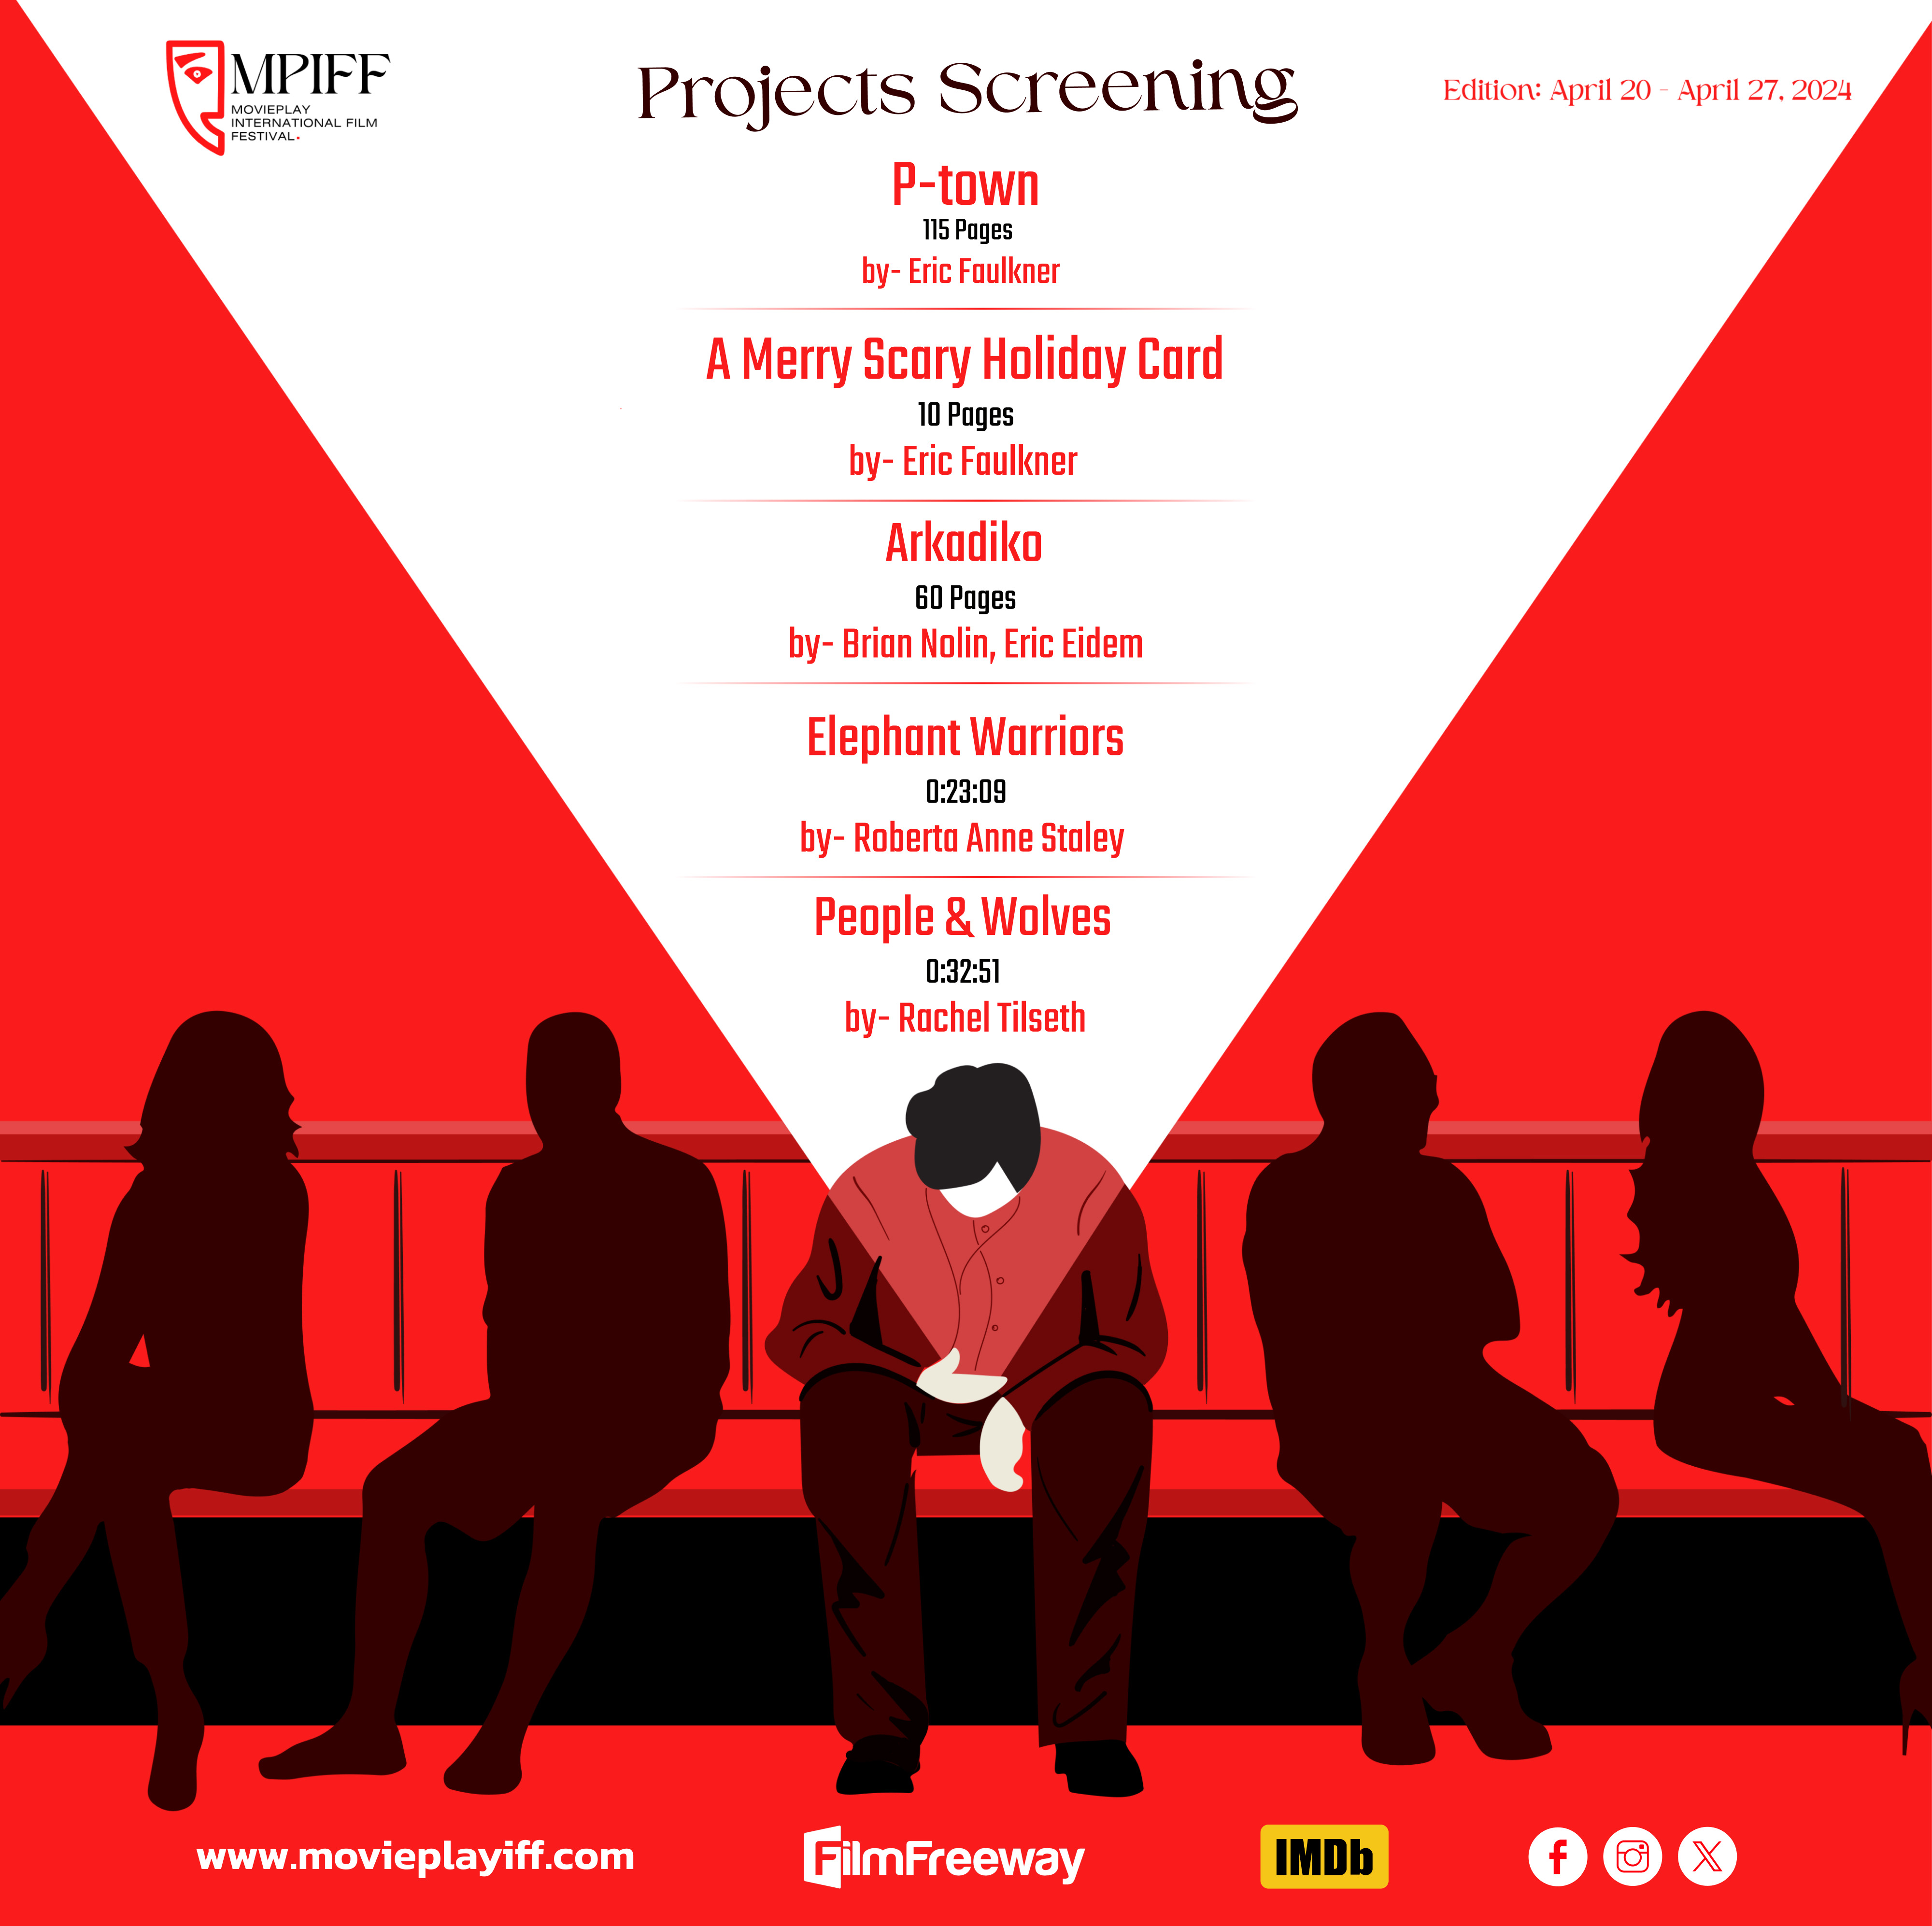 MoviePlay’s Online Film Festival, April 20-27, 2024, Will Be
Screening People and Wolves Film